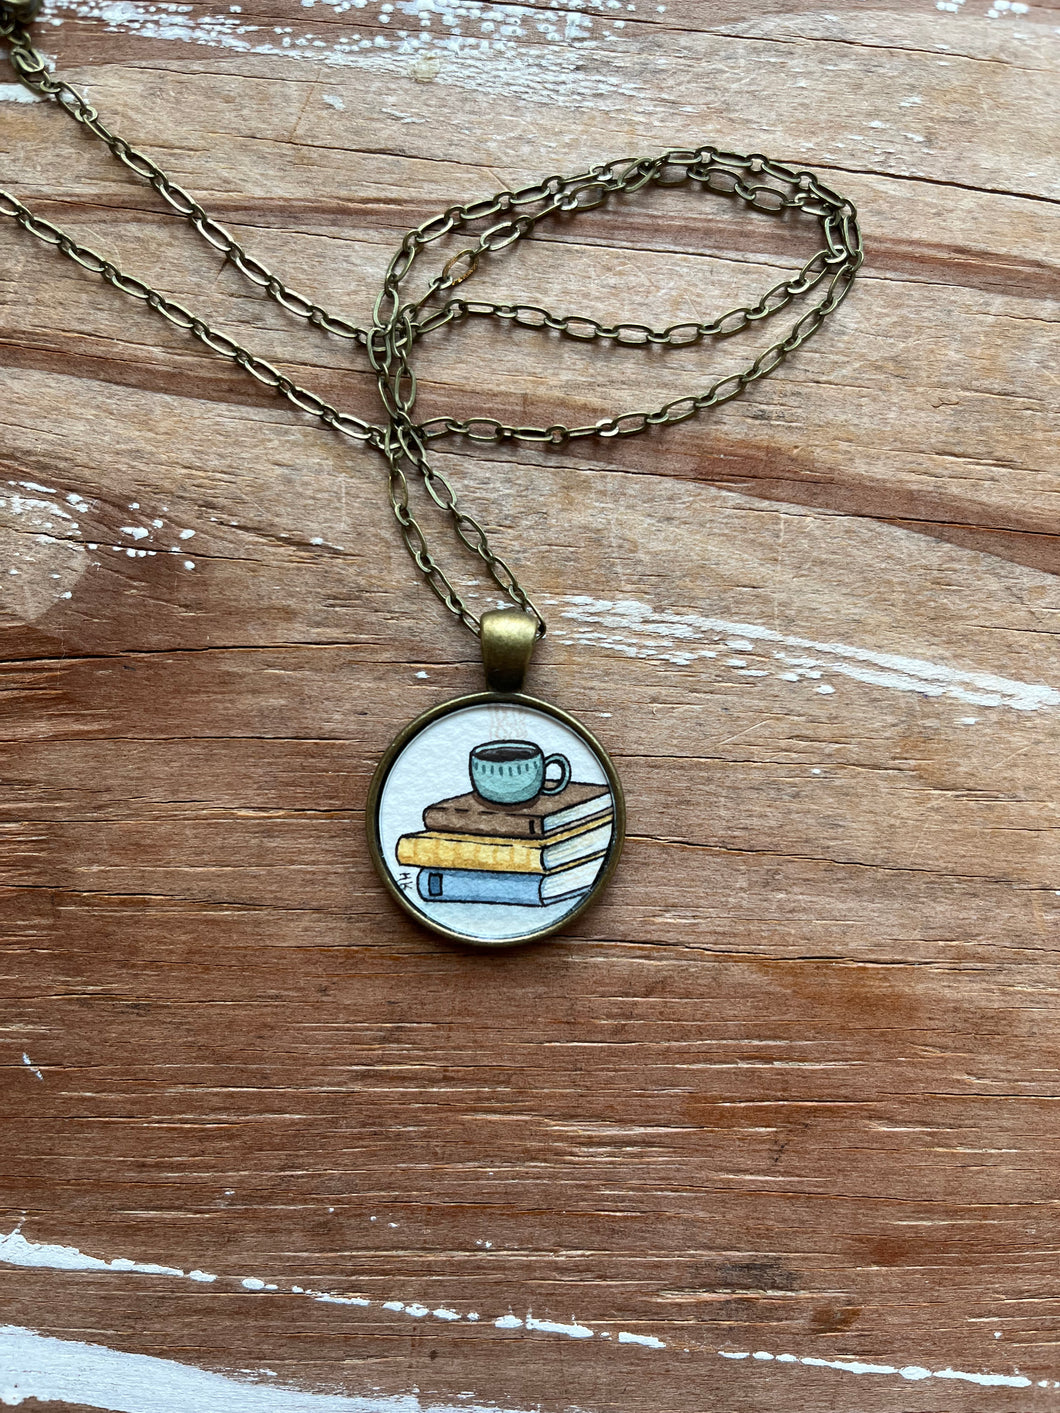 Coffee Mug and Old Books, Watercolor Hand Painted Necklace, Original Art Pendant, Gifts for Teachers or Students or Book Lovers